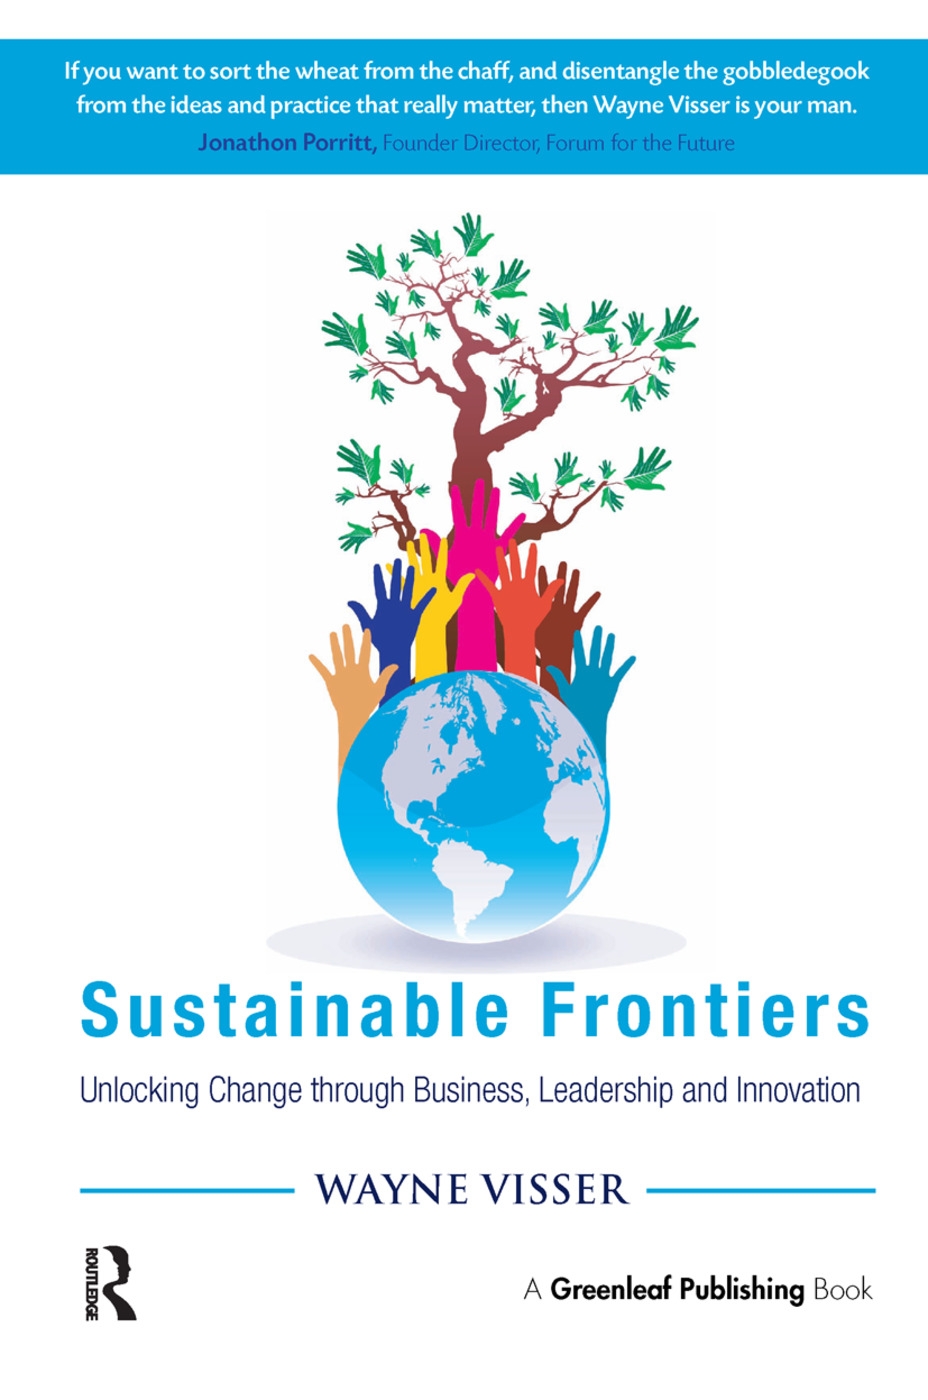 Sustainable Frontiers: Unlocking Change Through Business, Leadership and Innovation